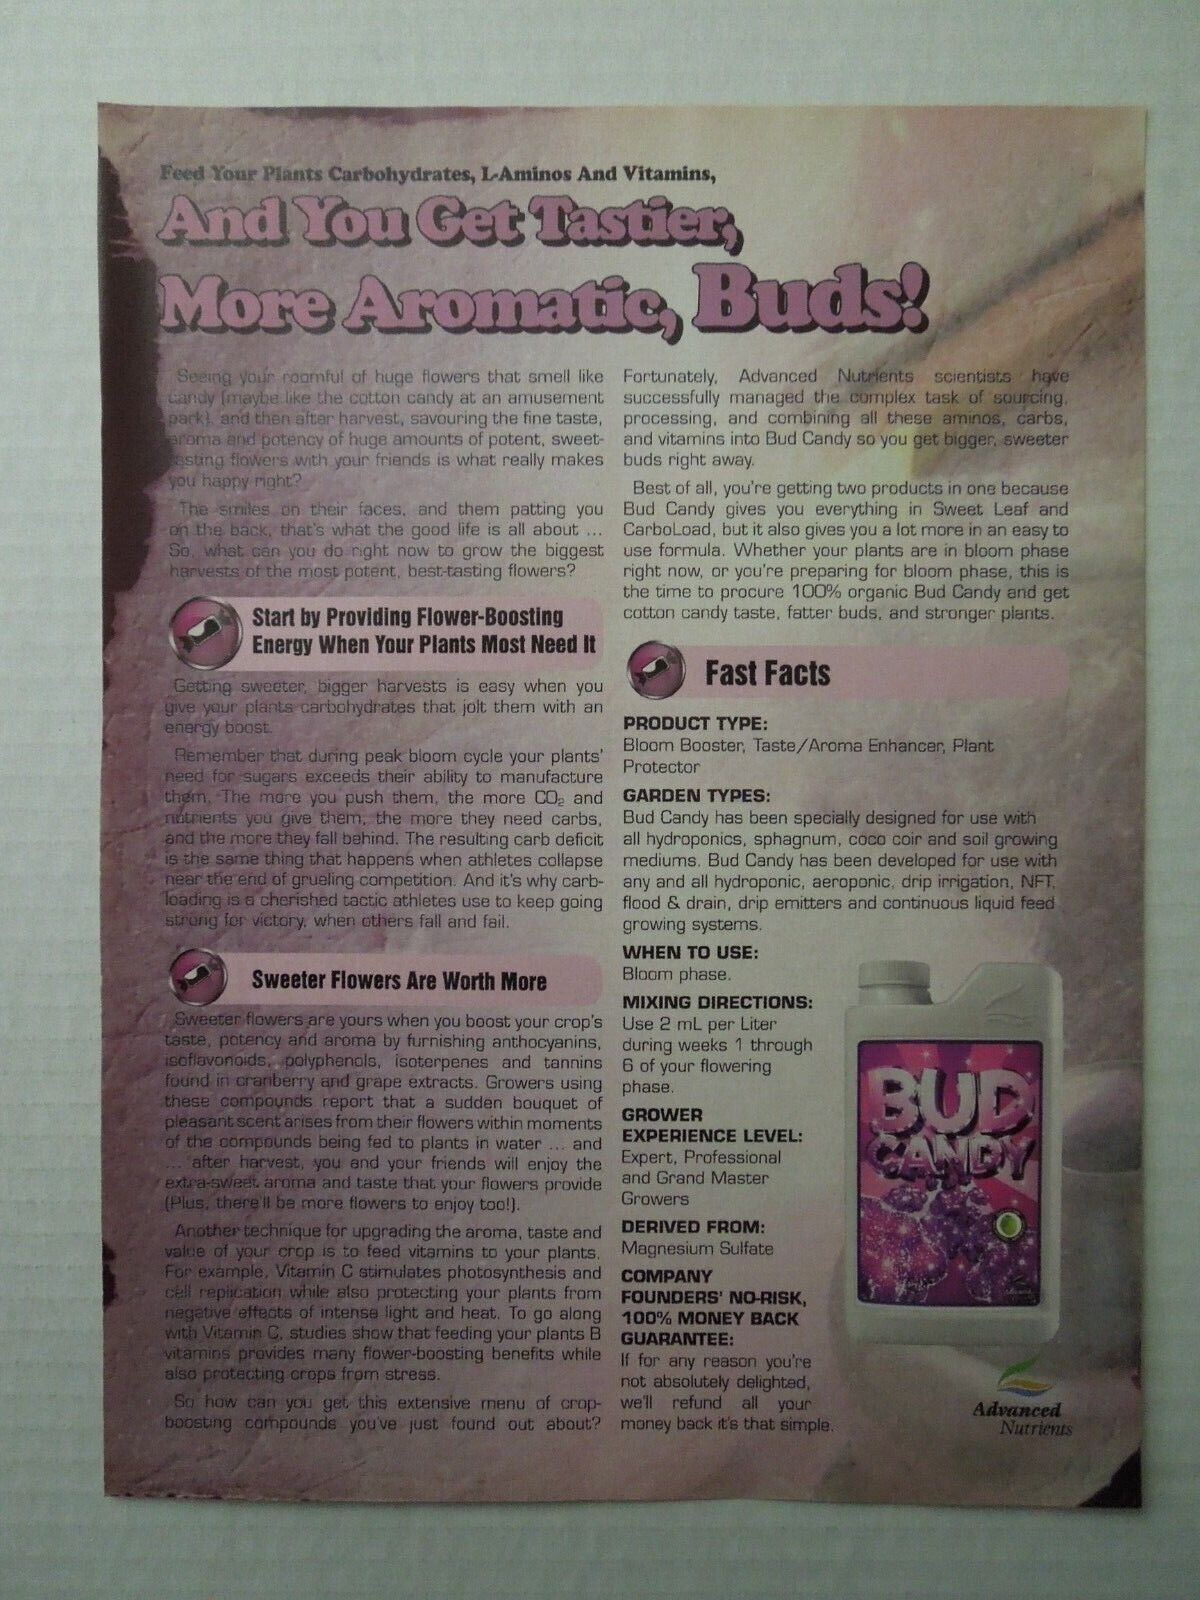 2010 ADVANCED NUTRIENTS Bud Candy Bloom Booster Magazine Ad